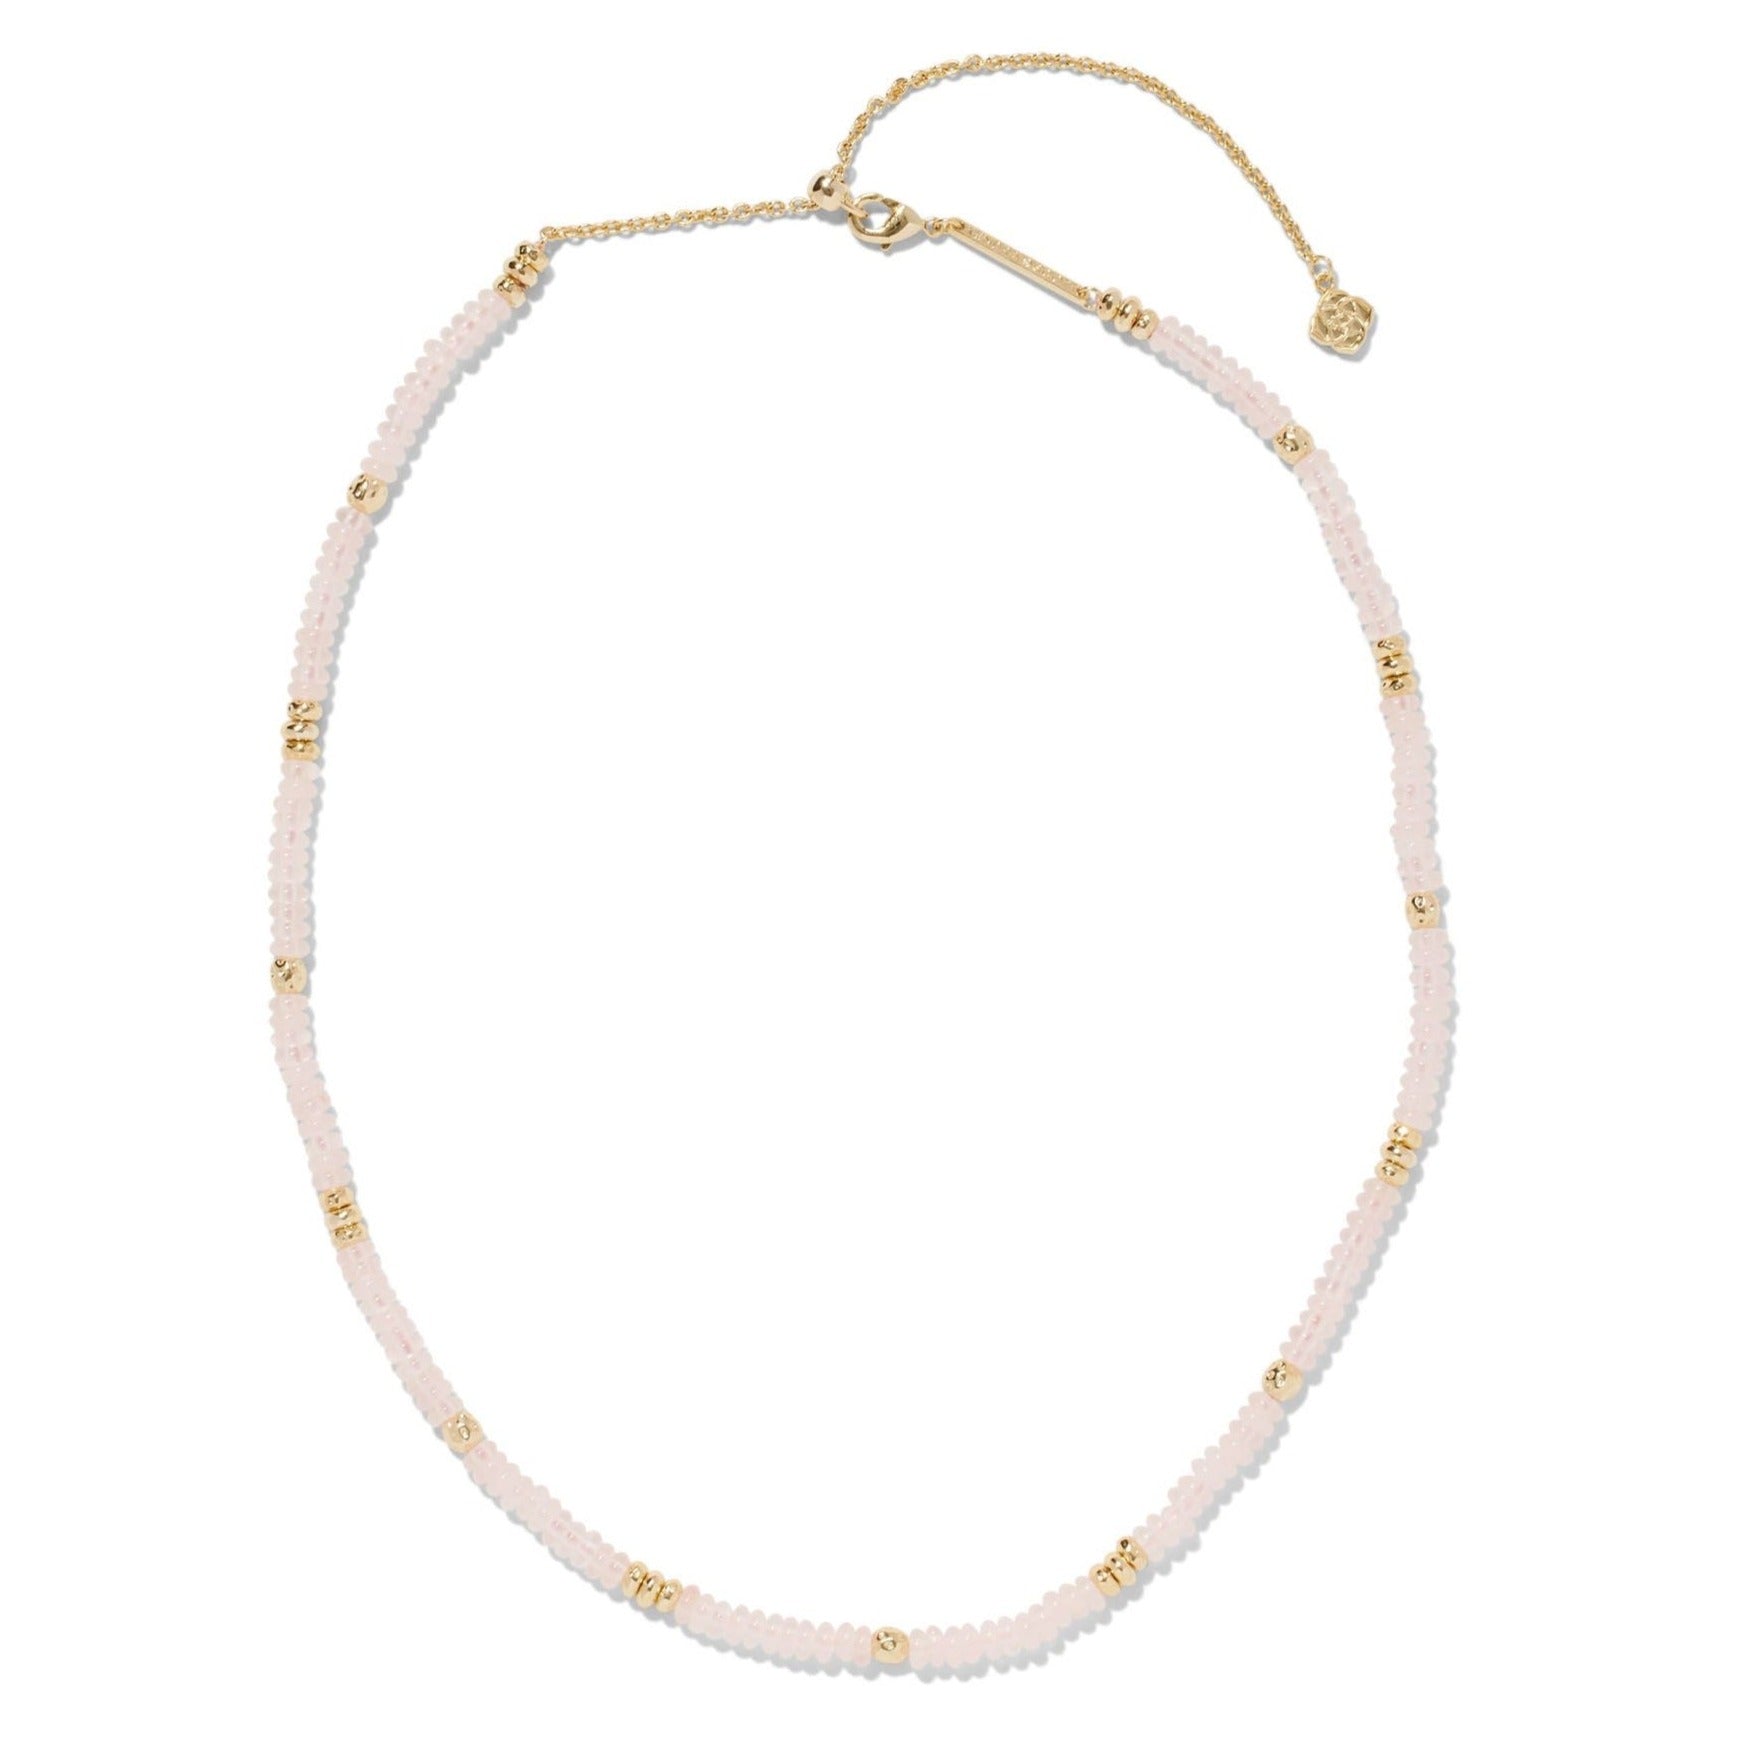 Kendra Scott | Deliah Gold Strand Necklace in Rose Quartz - Giddy Up Glamour Boutique